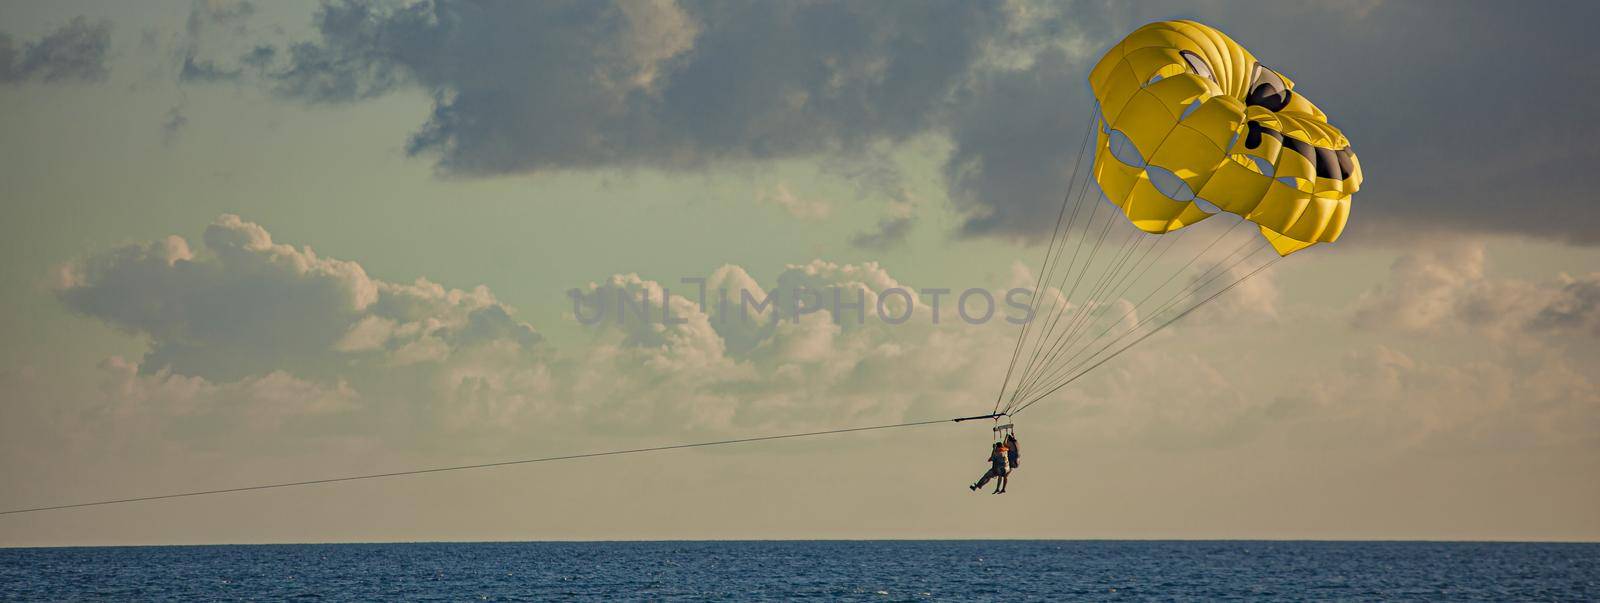 Parasail banner detail by pippocarlot